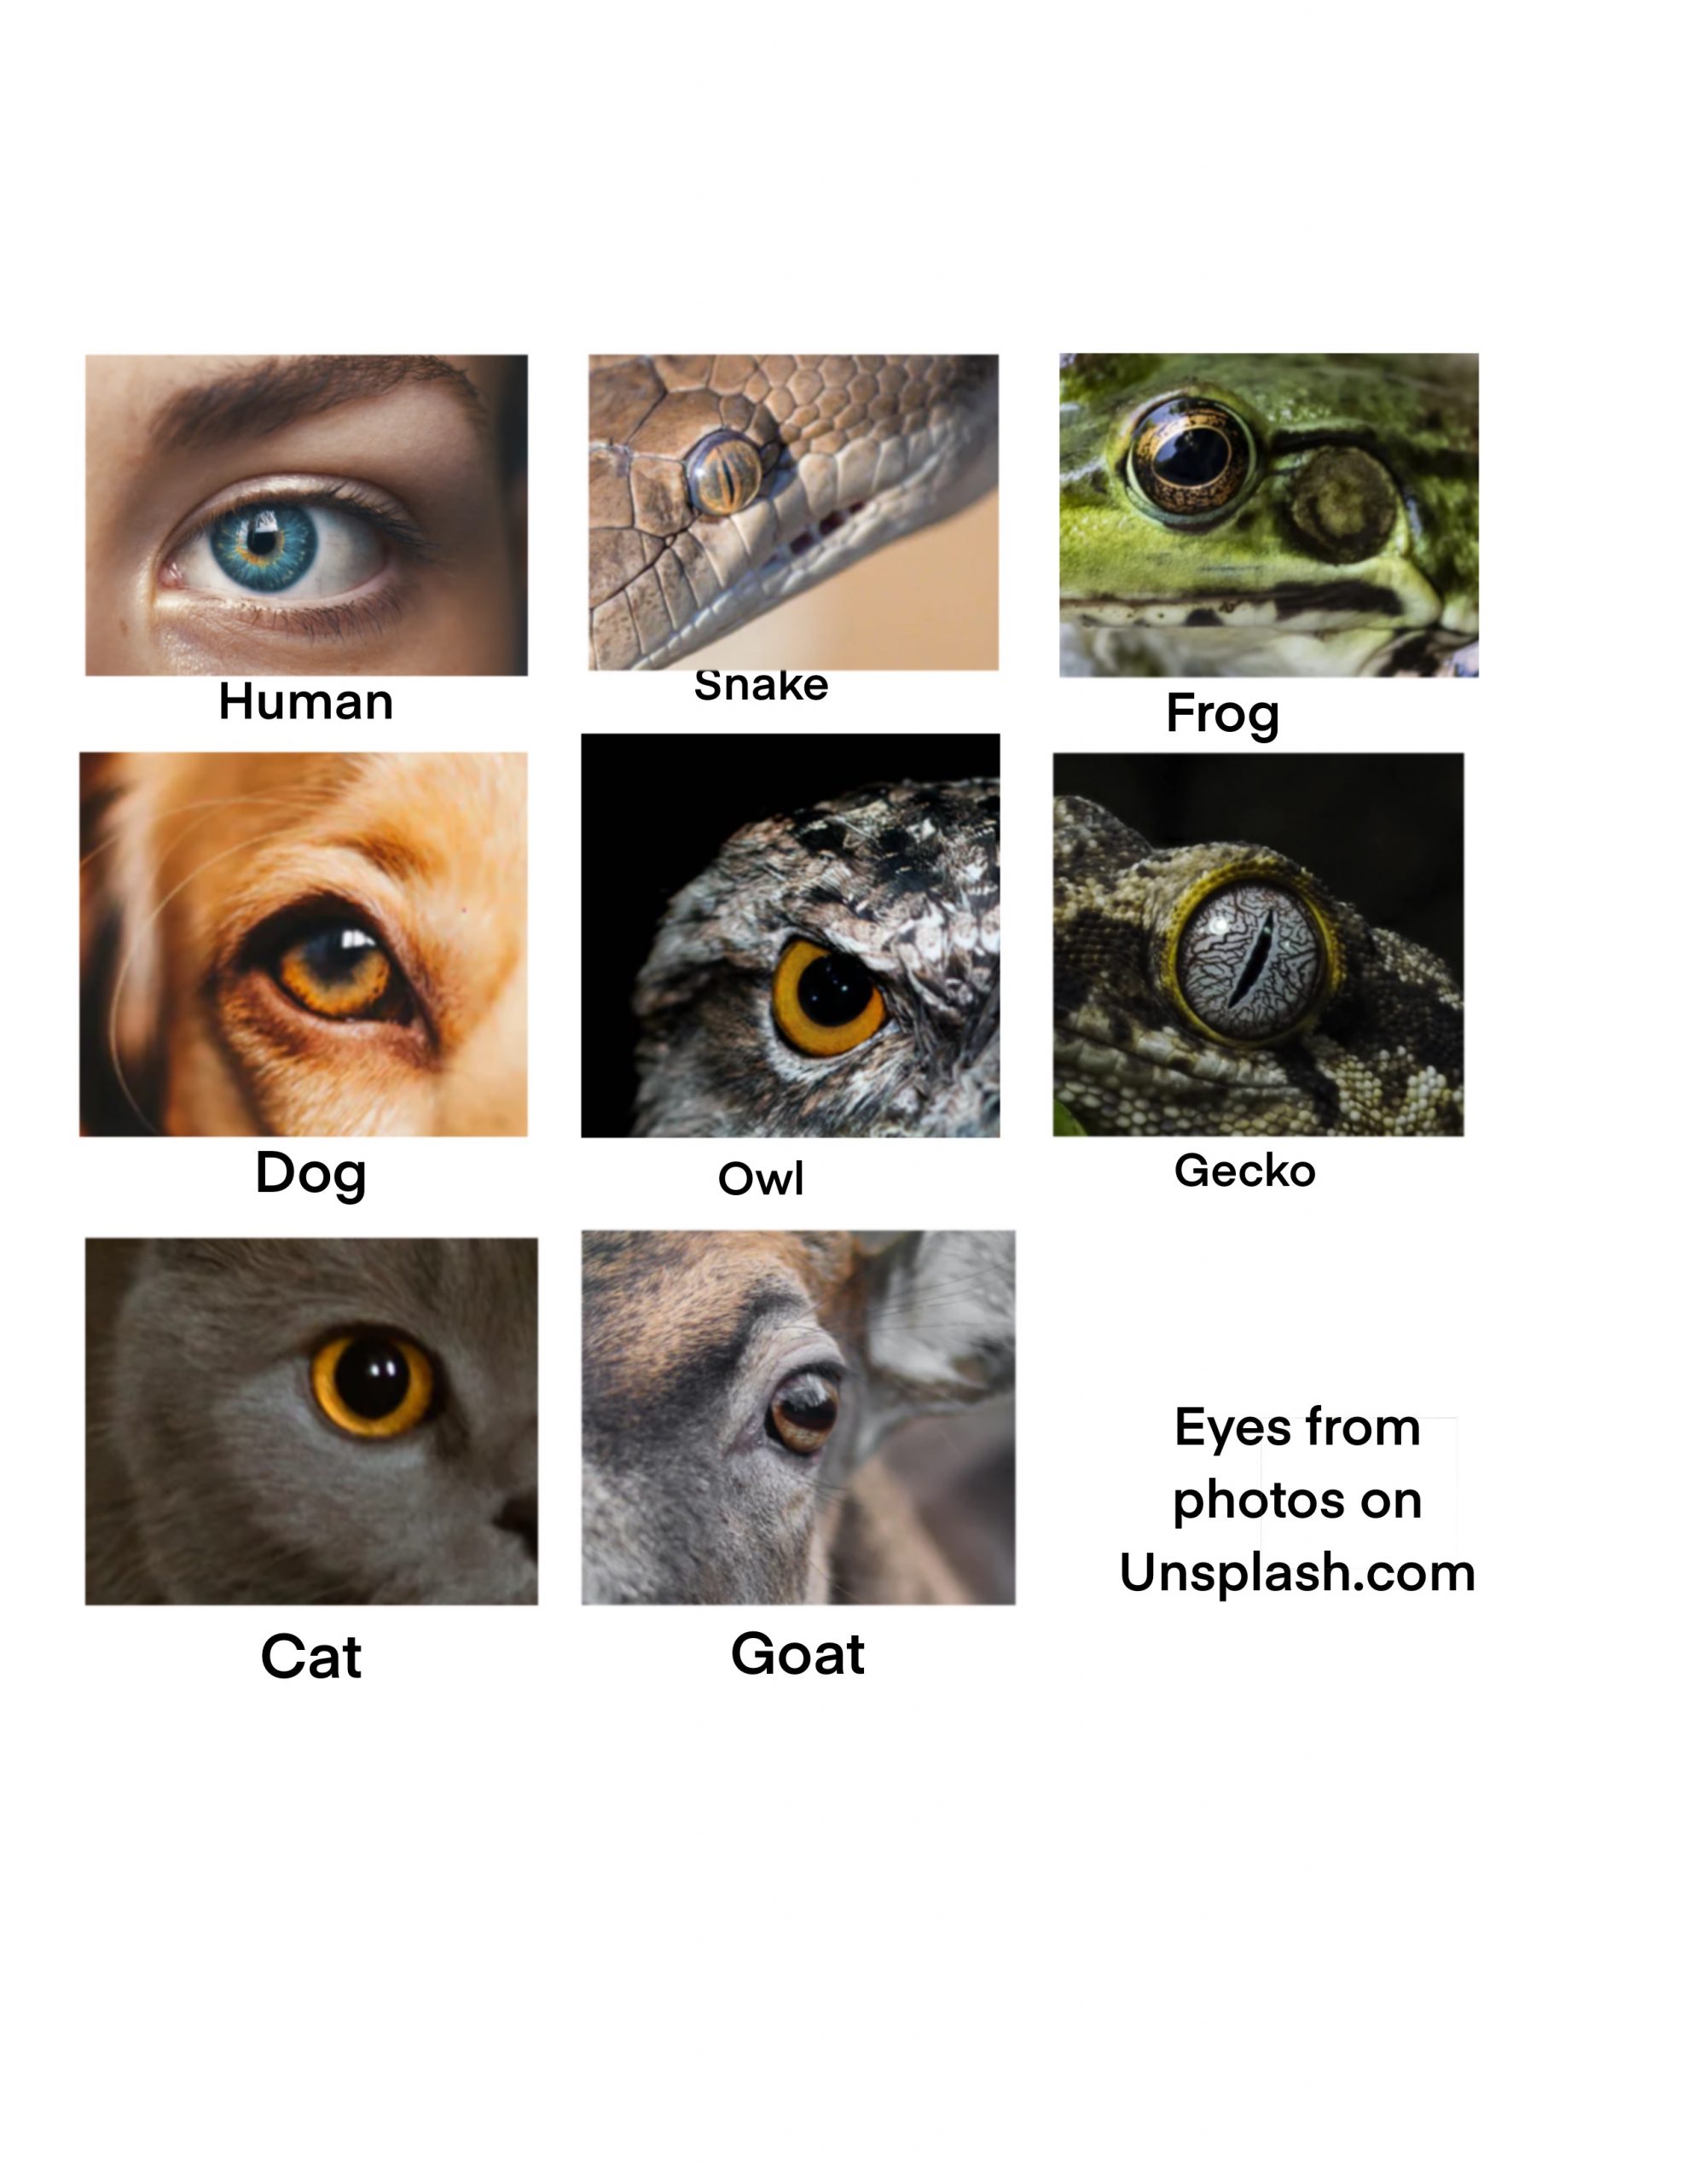 Reference photos of different animal eyes